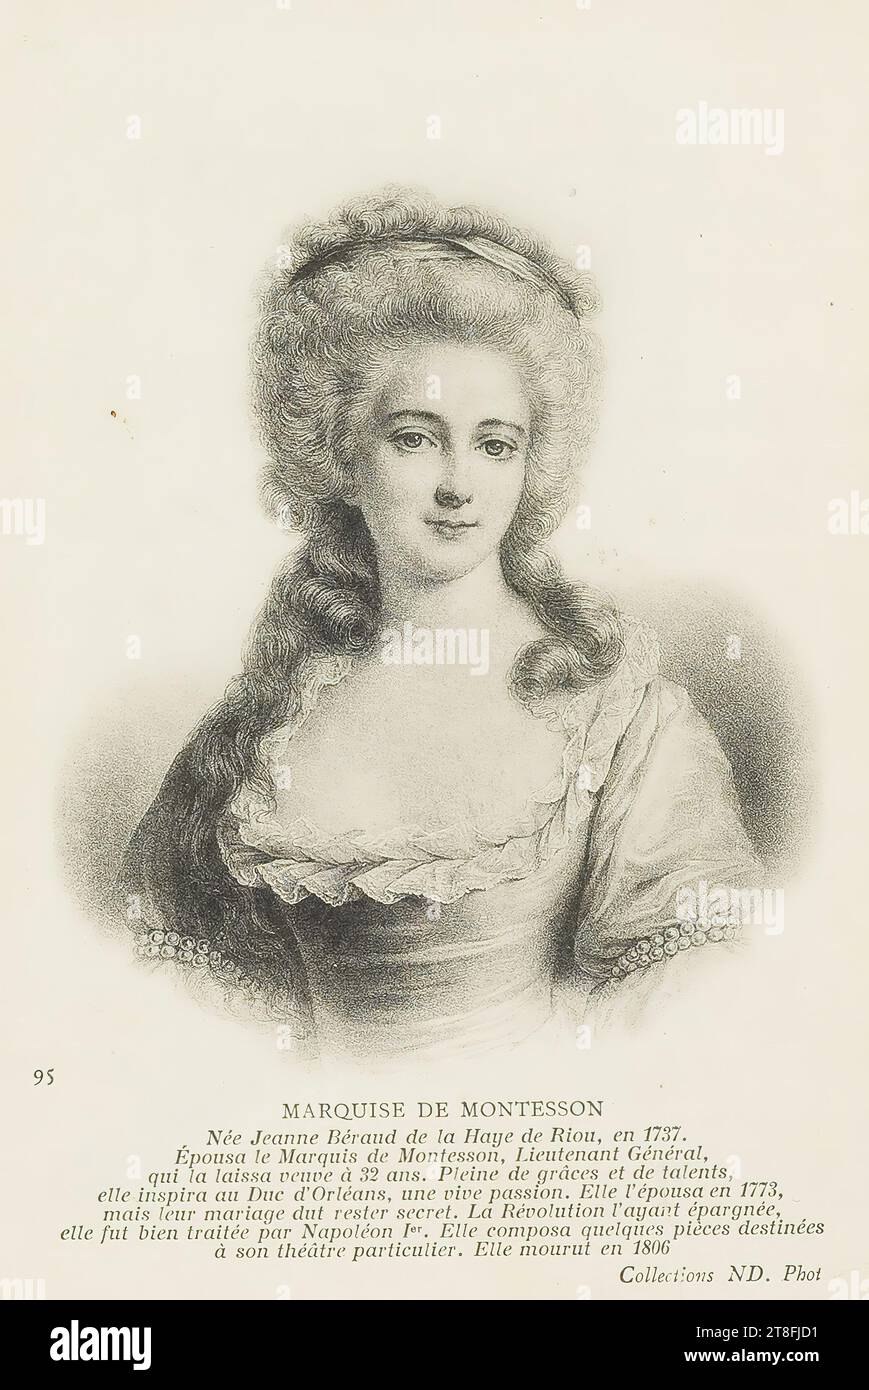 postcard. 95. MARQUISE DE MONTESSON, Born Jeanne Béraud de la Haye de Riou, in 1737, Married the Marquis de Montesson, Lieutenant General, who left her a widow at the age of 32. Full of graces and talents, she inspired the Duke of Orléans with a lively passion. She married him in 1773, but their marriage had to remain secret. The Revolution having spared her, she was soon treated by Napoleon I. She composed a few pieces intended for her particular theatre. She died in 1806. Collections ND. Photo Stock Photo